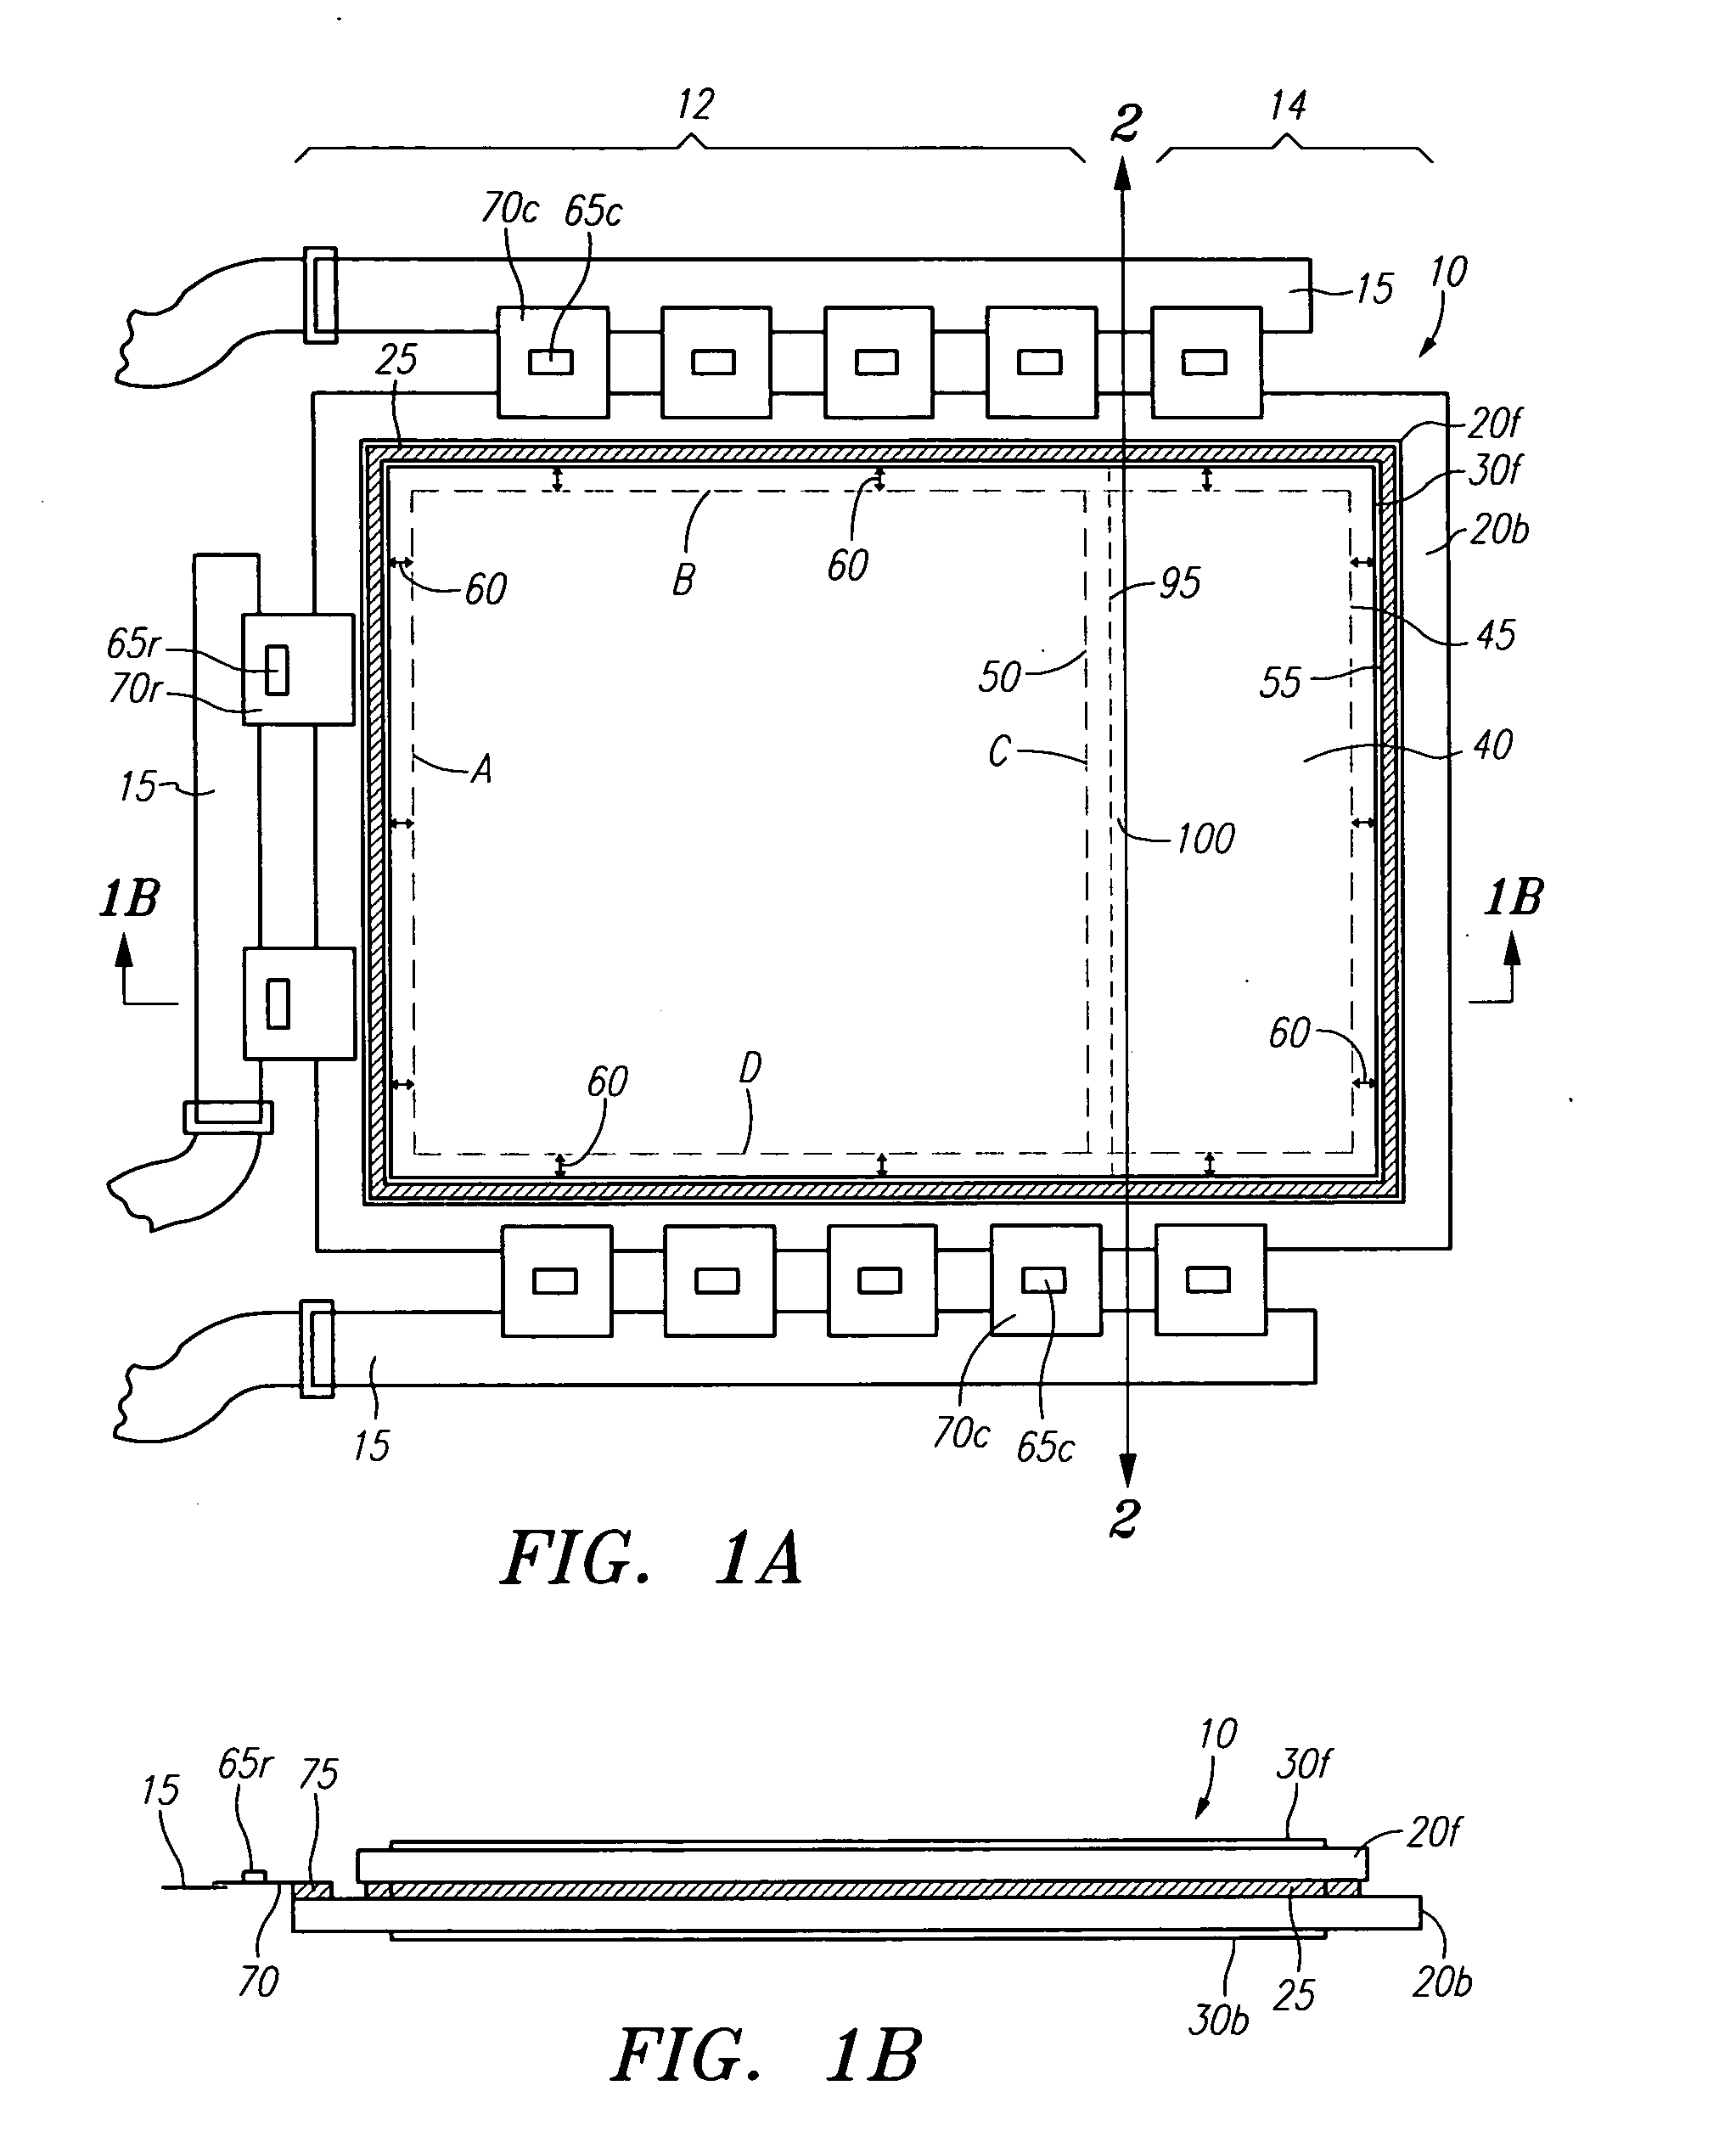 Apparatus and methods for cutting electronic displays during resizing